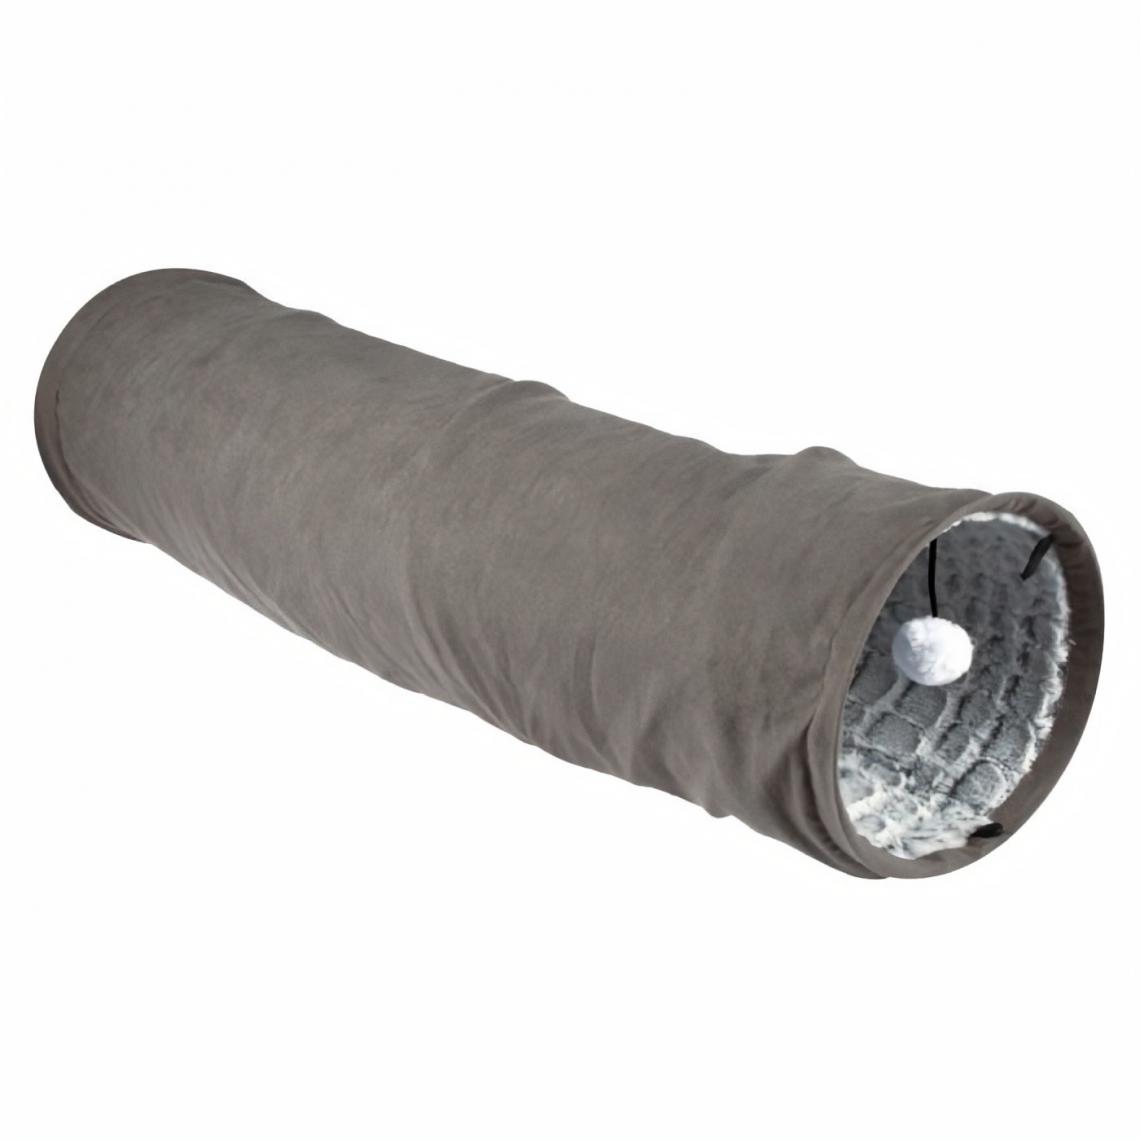 Mpets - M PETS Snake Suede Tunnel pour chat - Gamelle pour chat